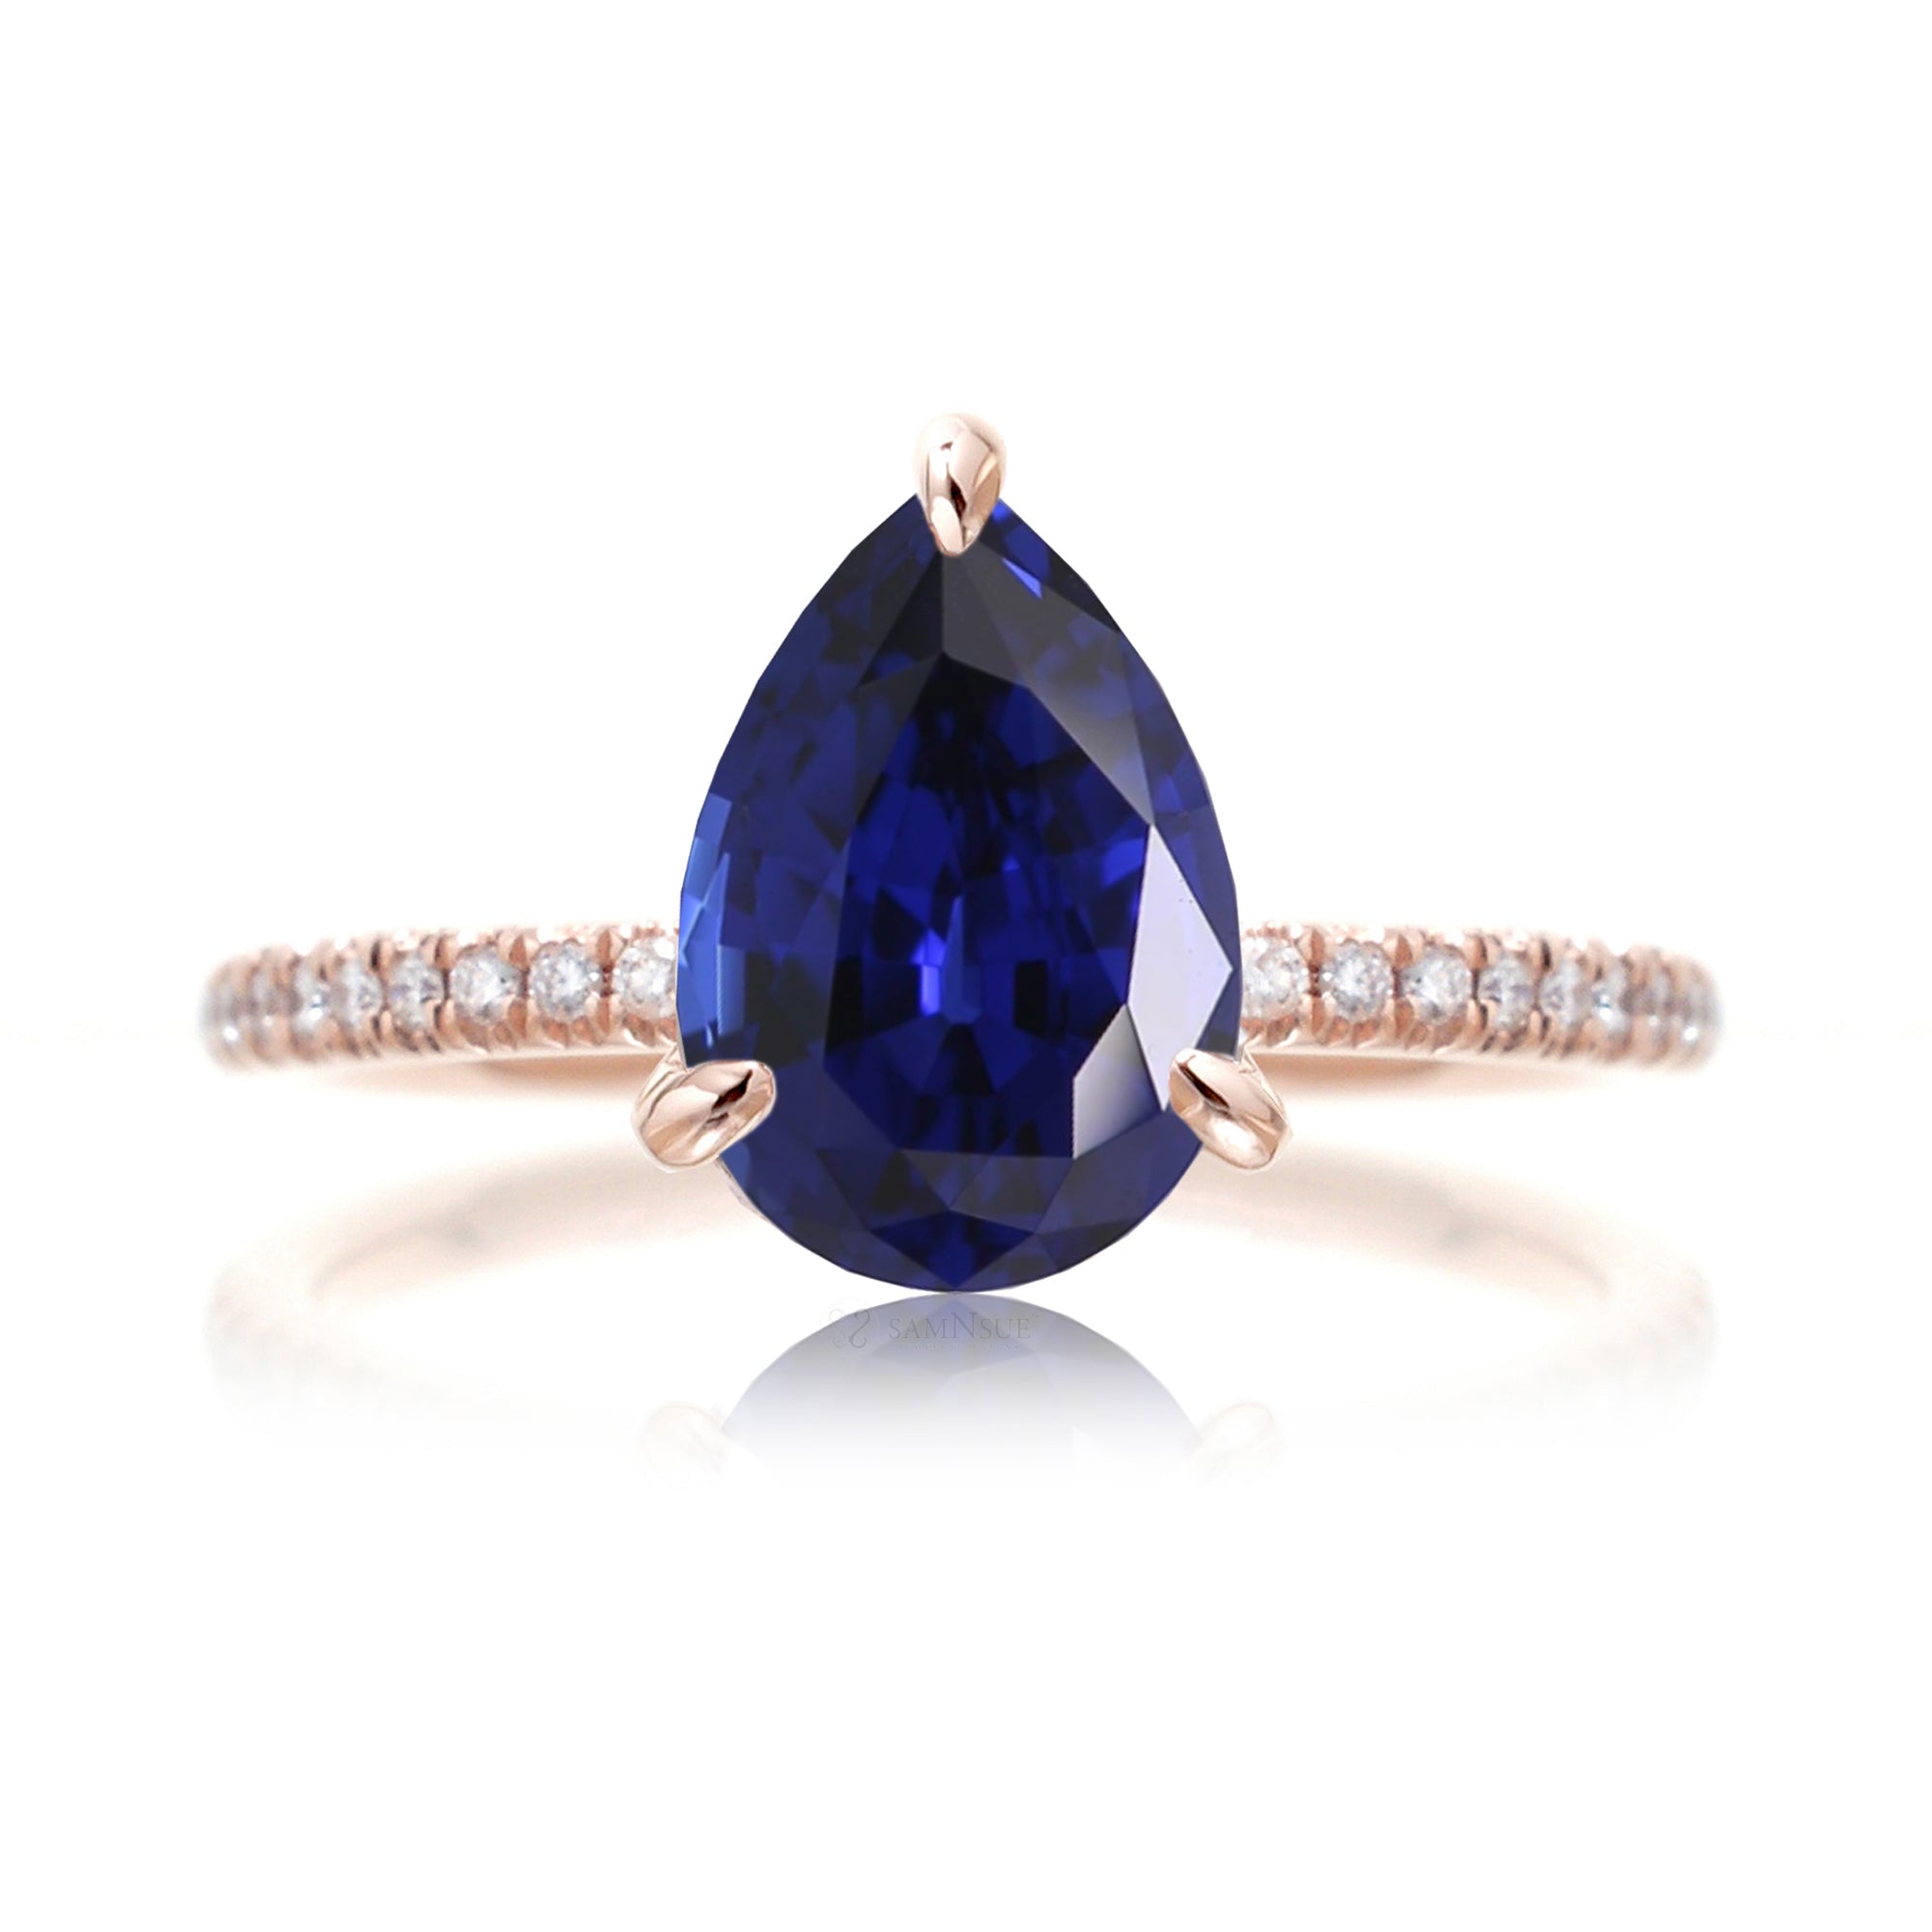 Pear cut blue sapphire diamond band engagement ring rose gold - the Ava